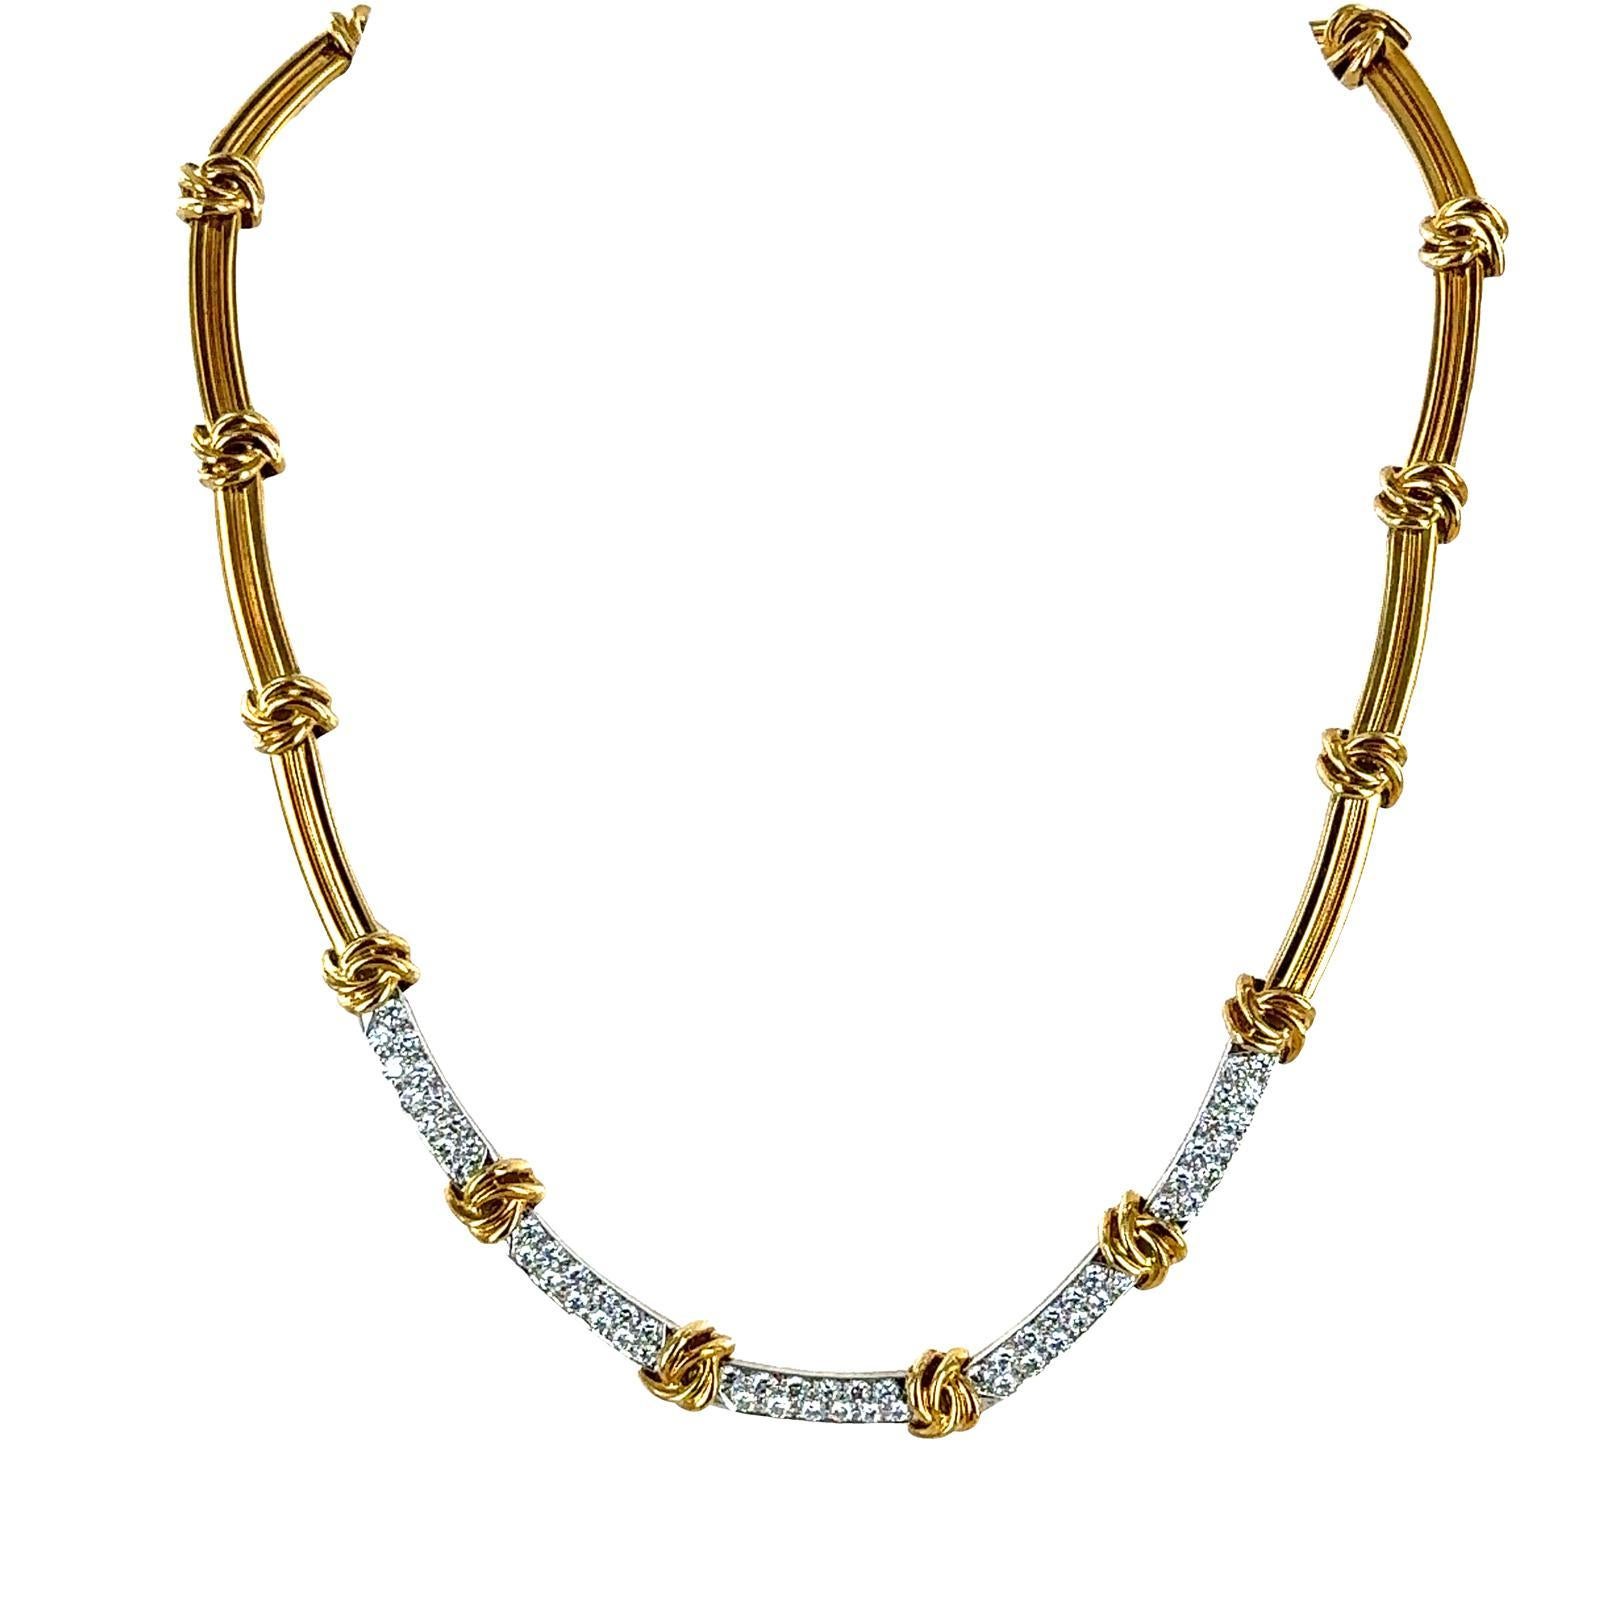 Tiffany & Co. Diamond 18 Karat Yellow Gold Vintage Link Choker Necklace In Excellent Condition For Sale In Boca Raton, FL